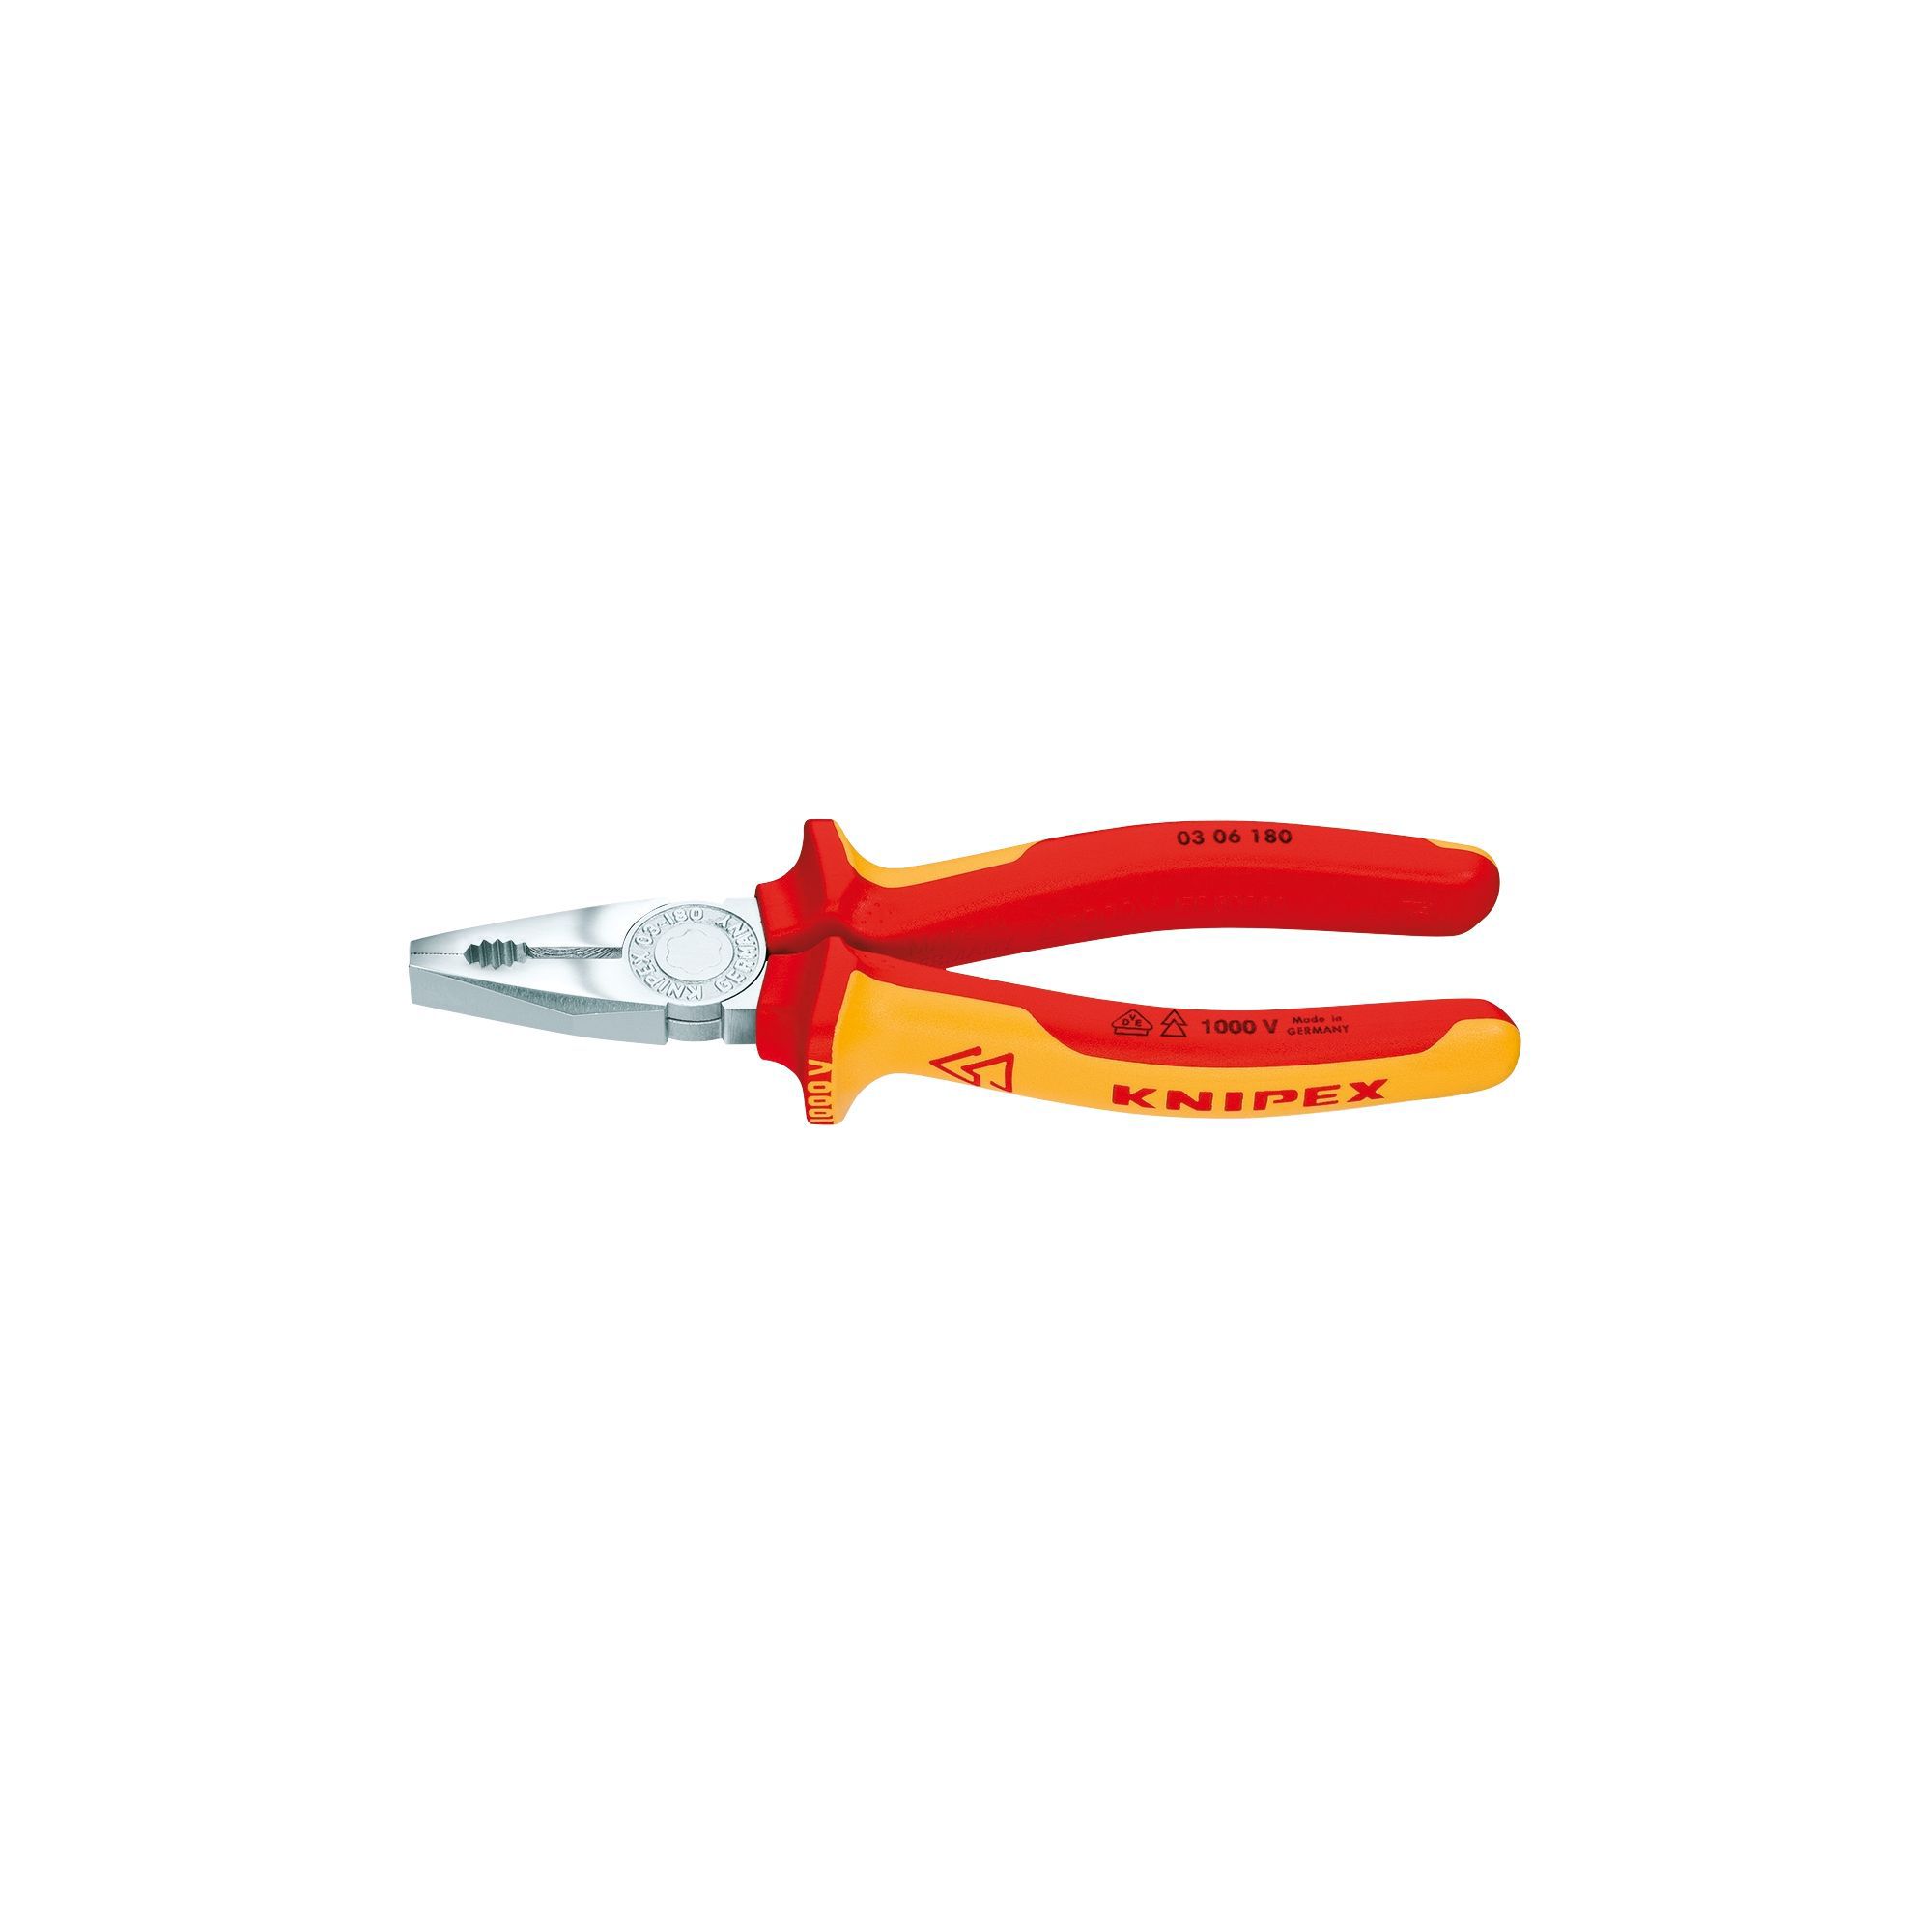 Knipex 180mm Combination pliers